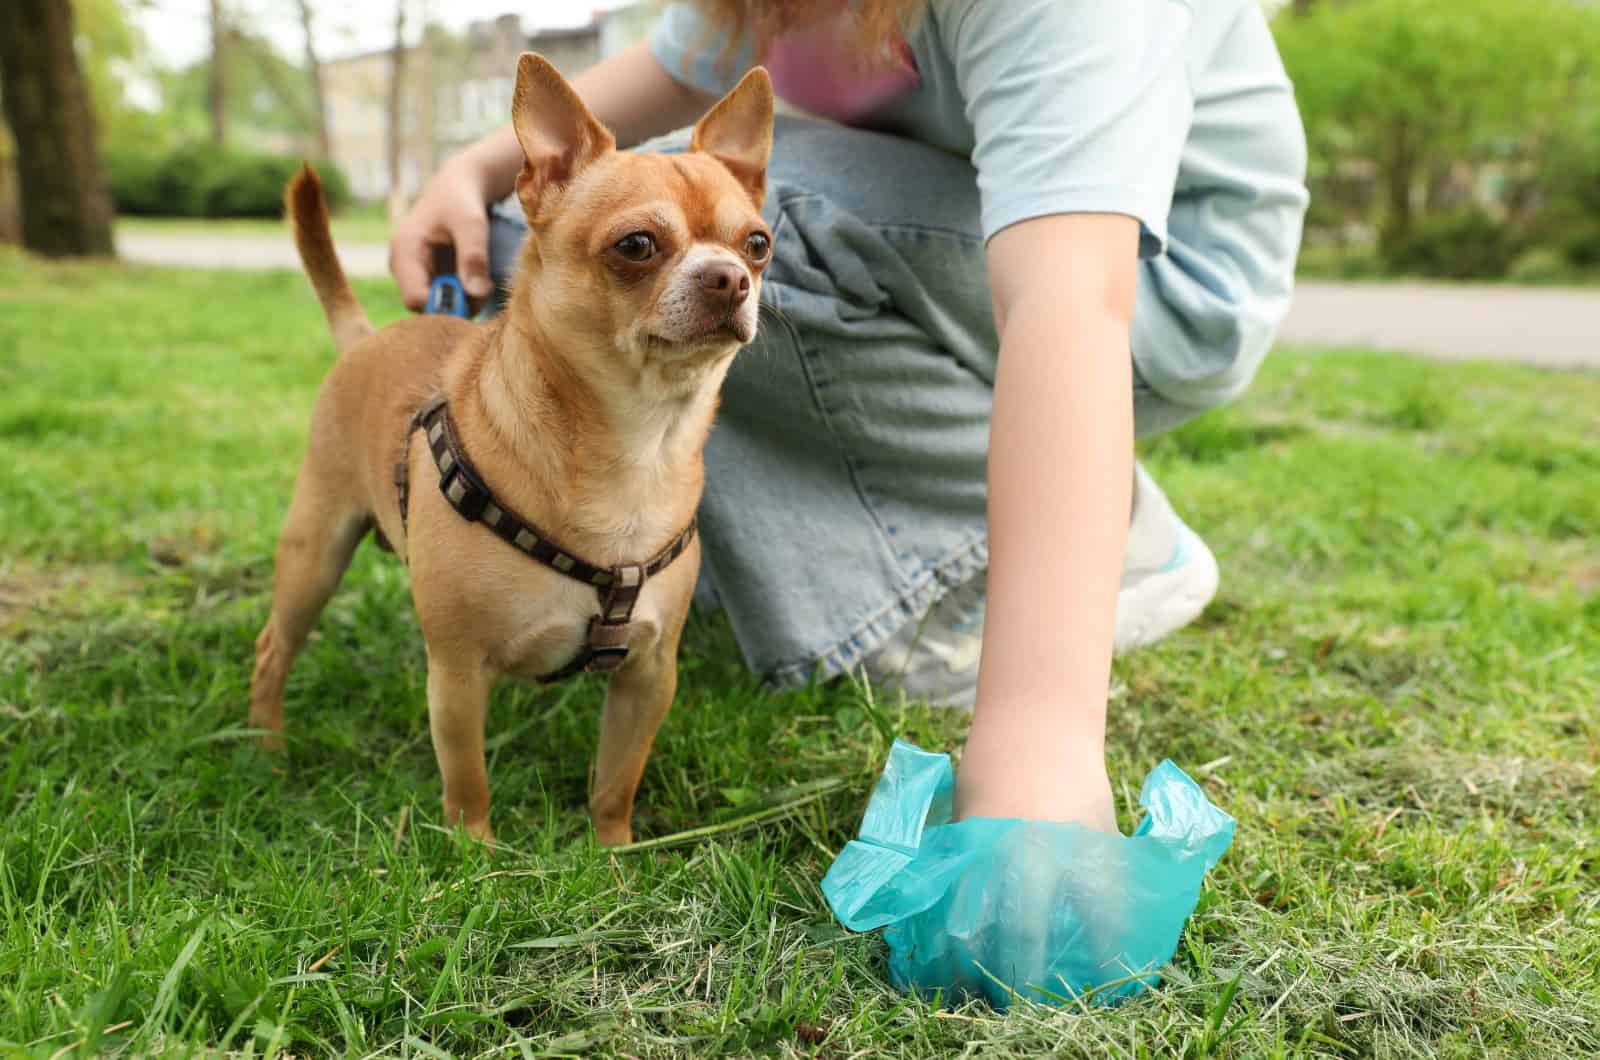 owner picking up dog poop from grass